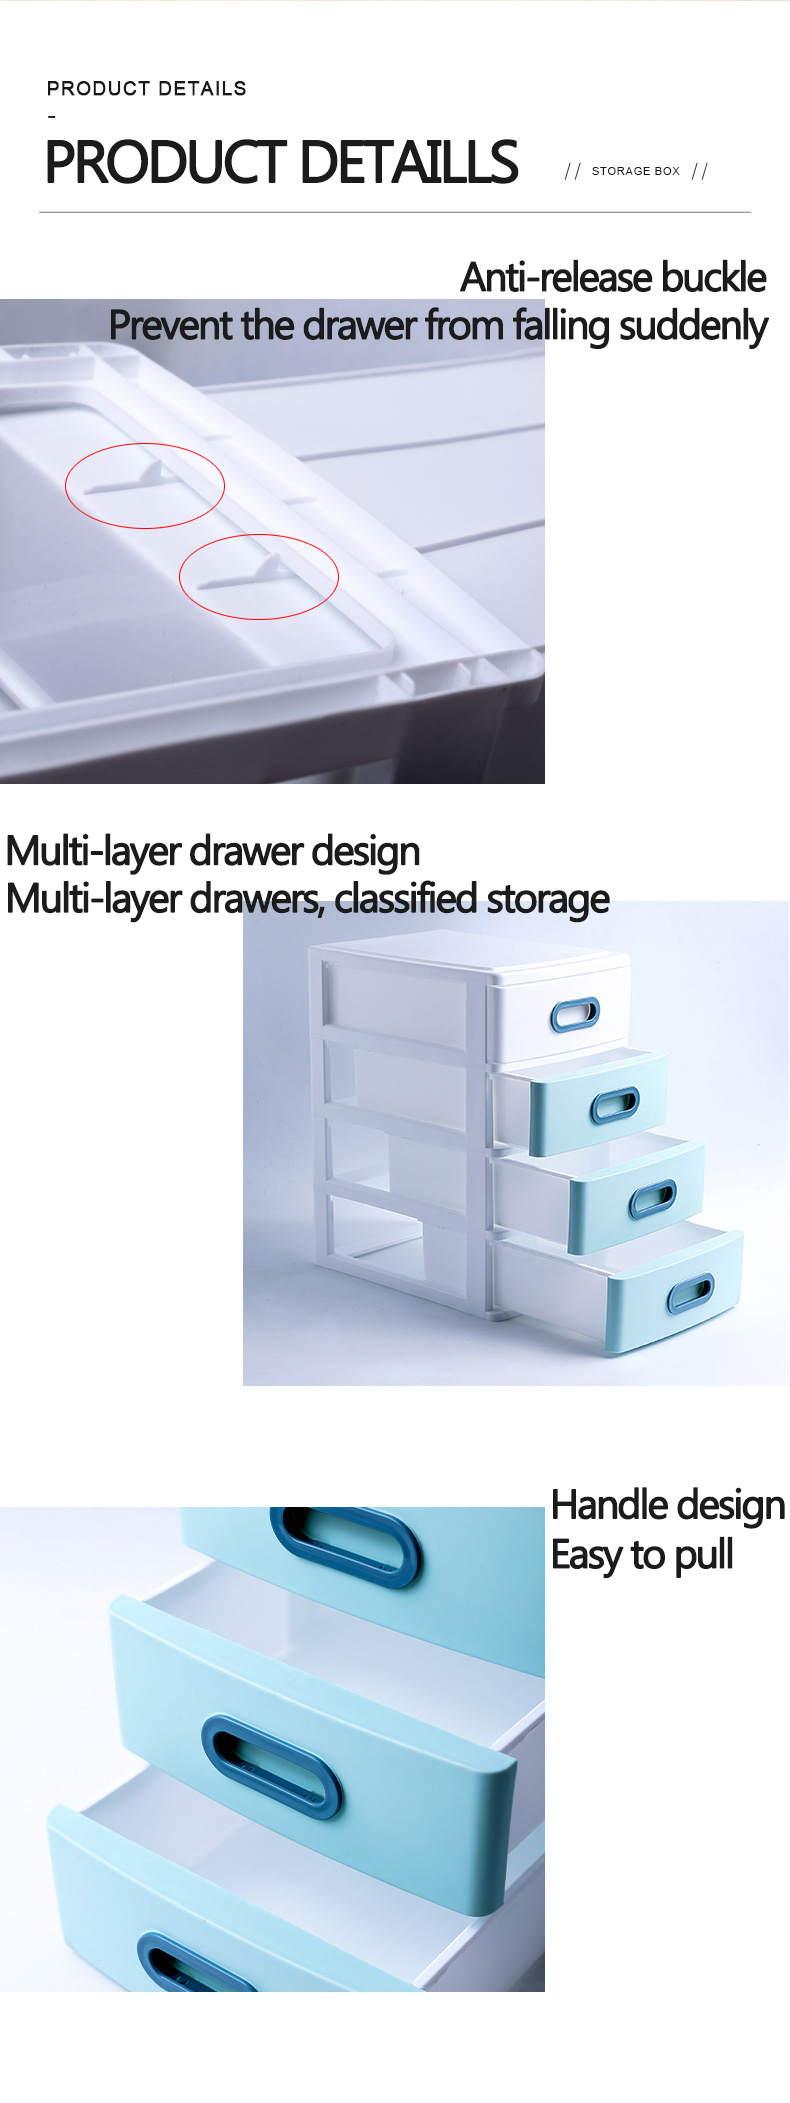 Modern Office Desk Stationery Holder Home Medicines Organizer Box Plastic Transparent Jewelry Makeup Storage Drawer with Handle